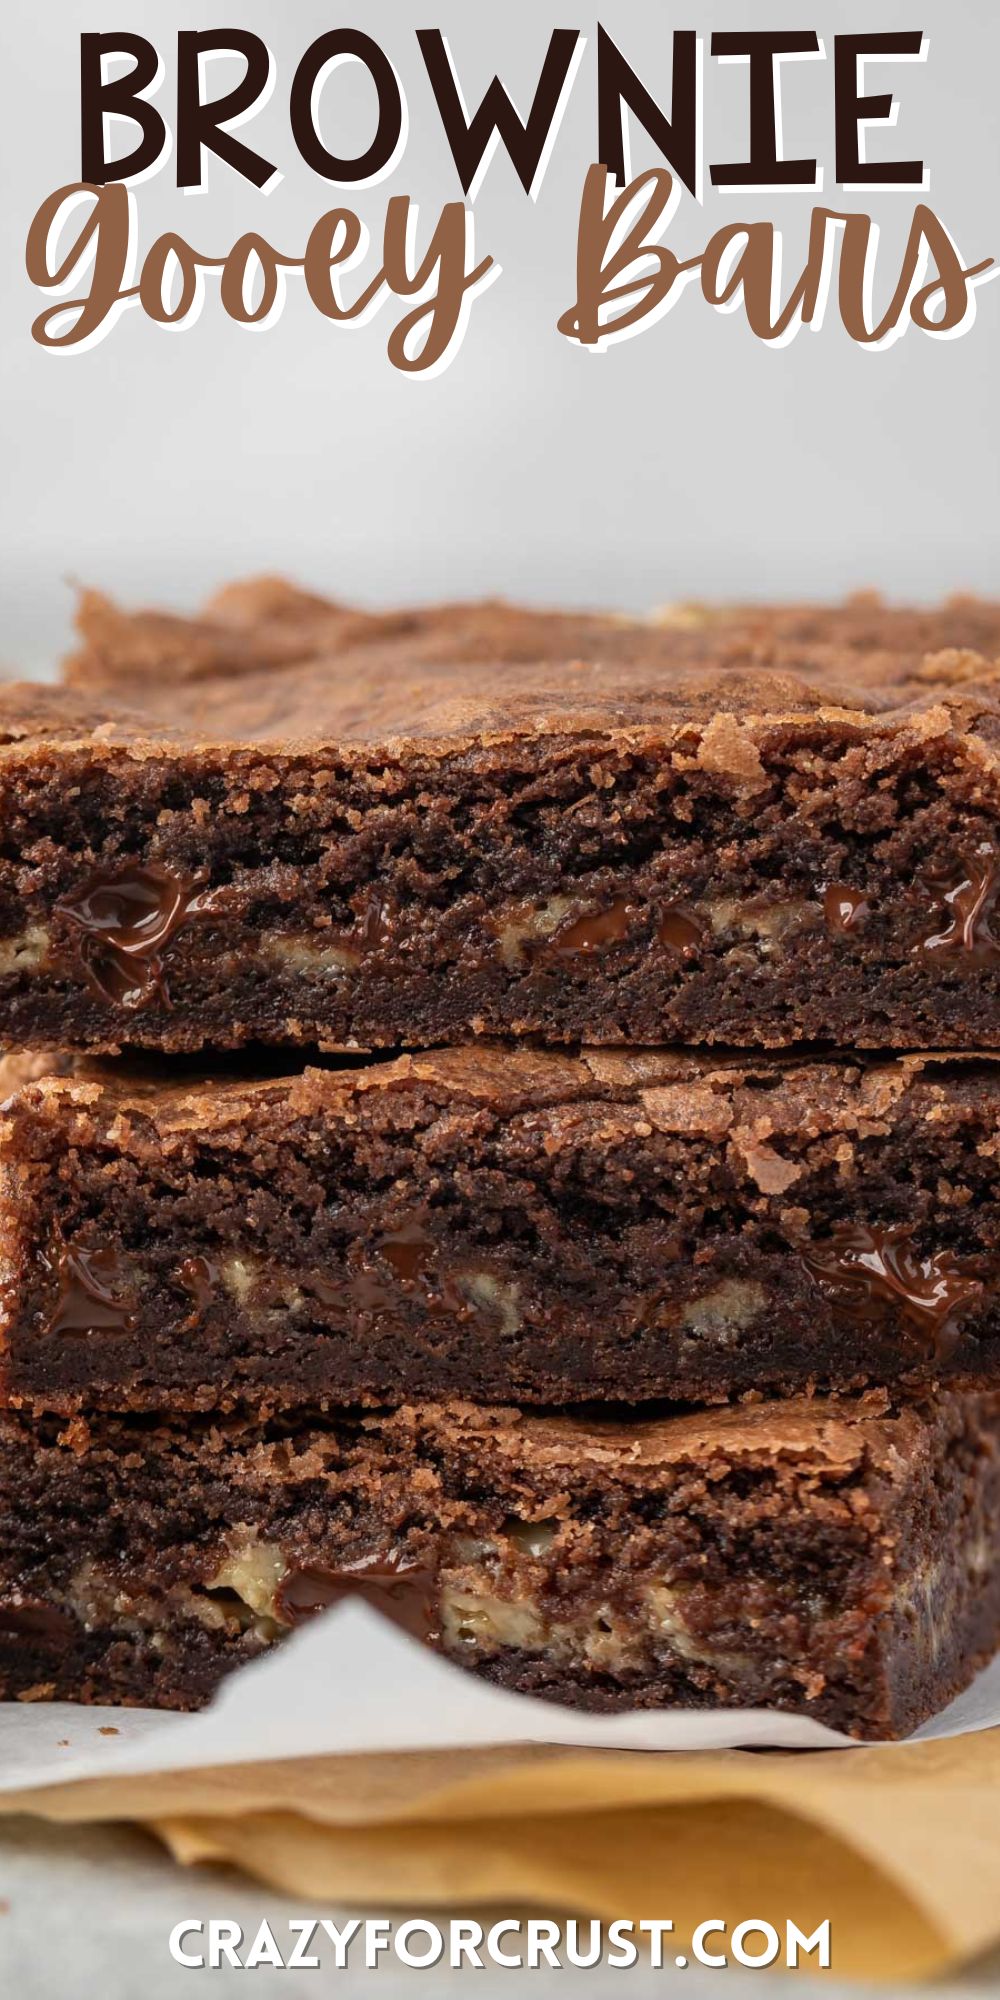 stacked brownies with chocolate chips baked in with words on the image.